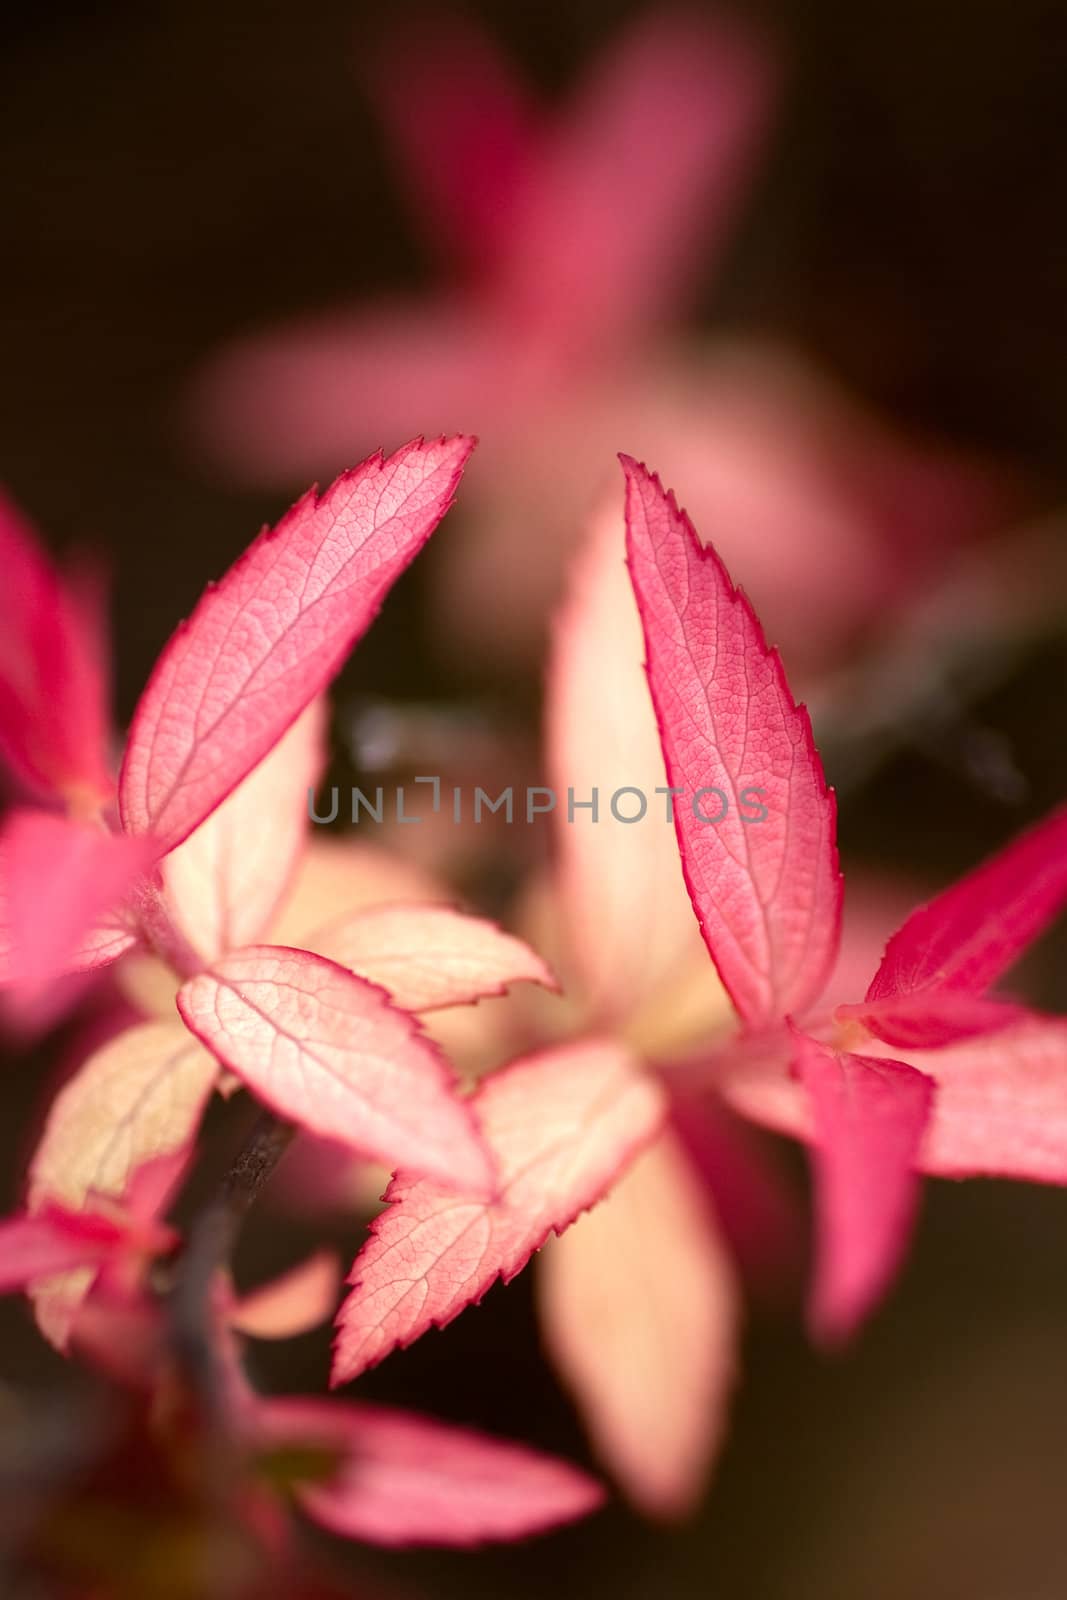 Focus on red leaves in the foreground, with a blurred background.